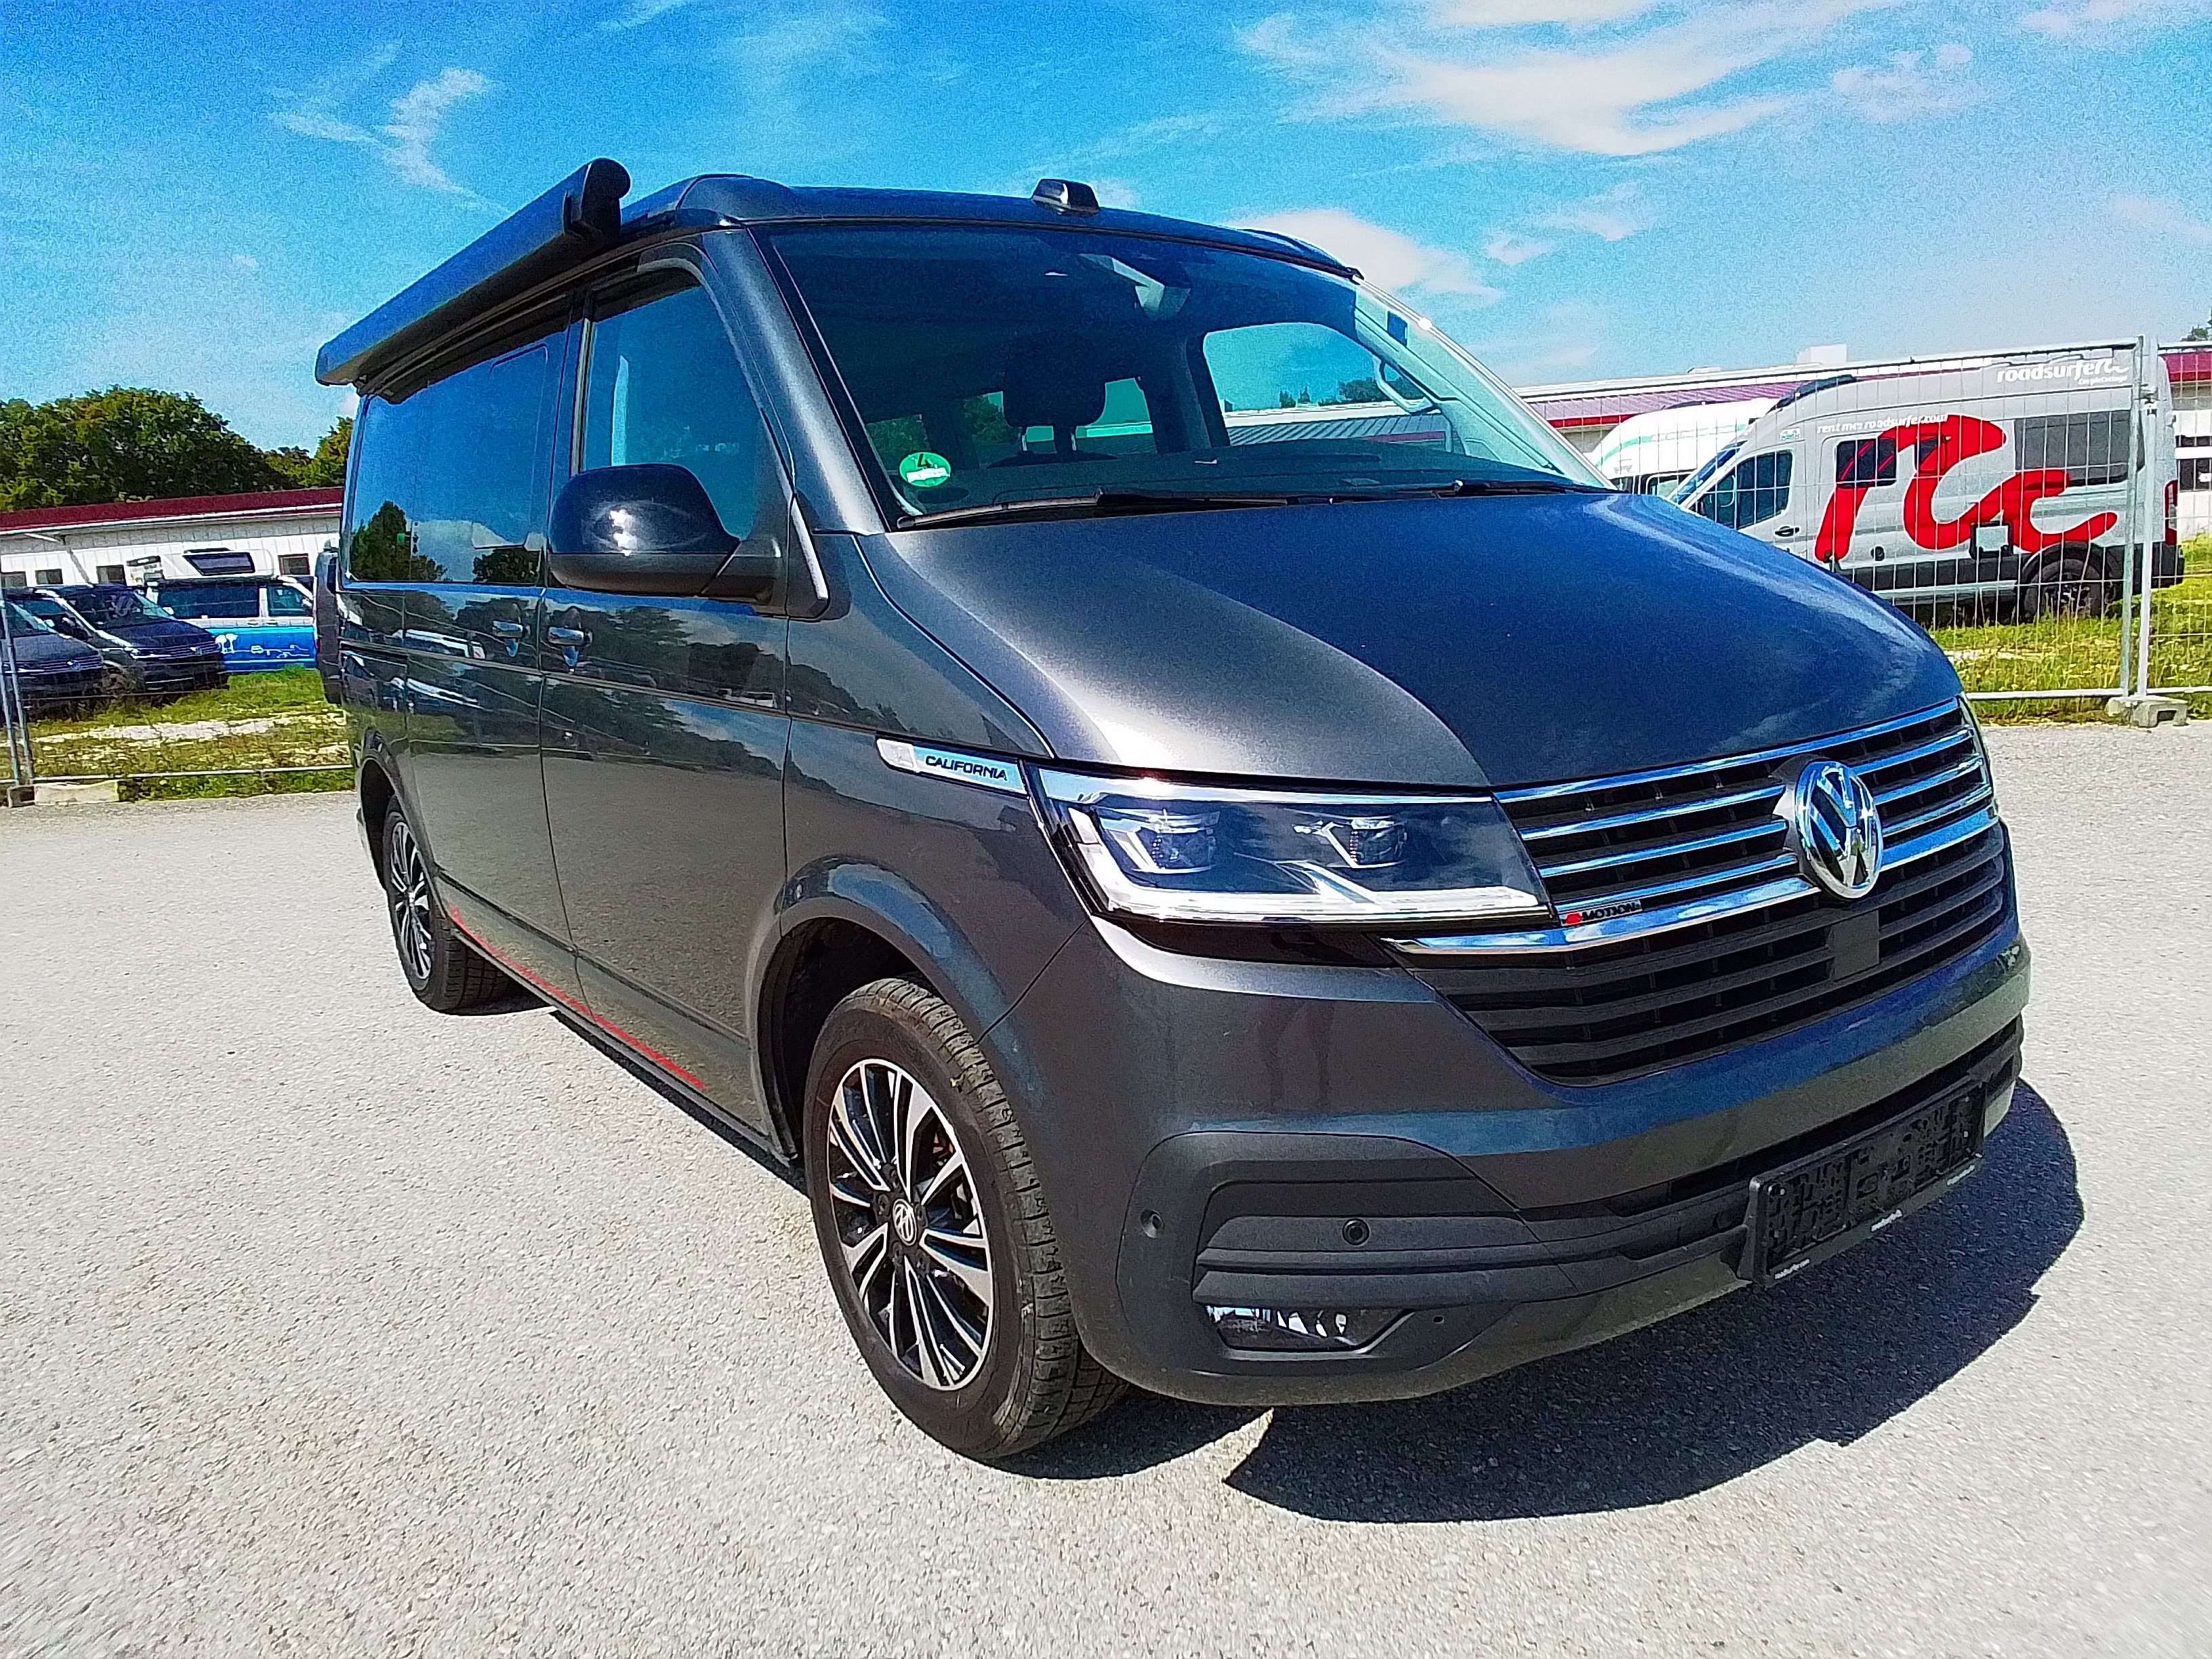 Volkswagen T6.1 California Other in Grey used in München for € 75,900.-